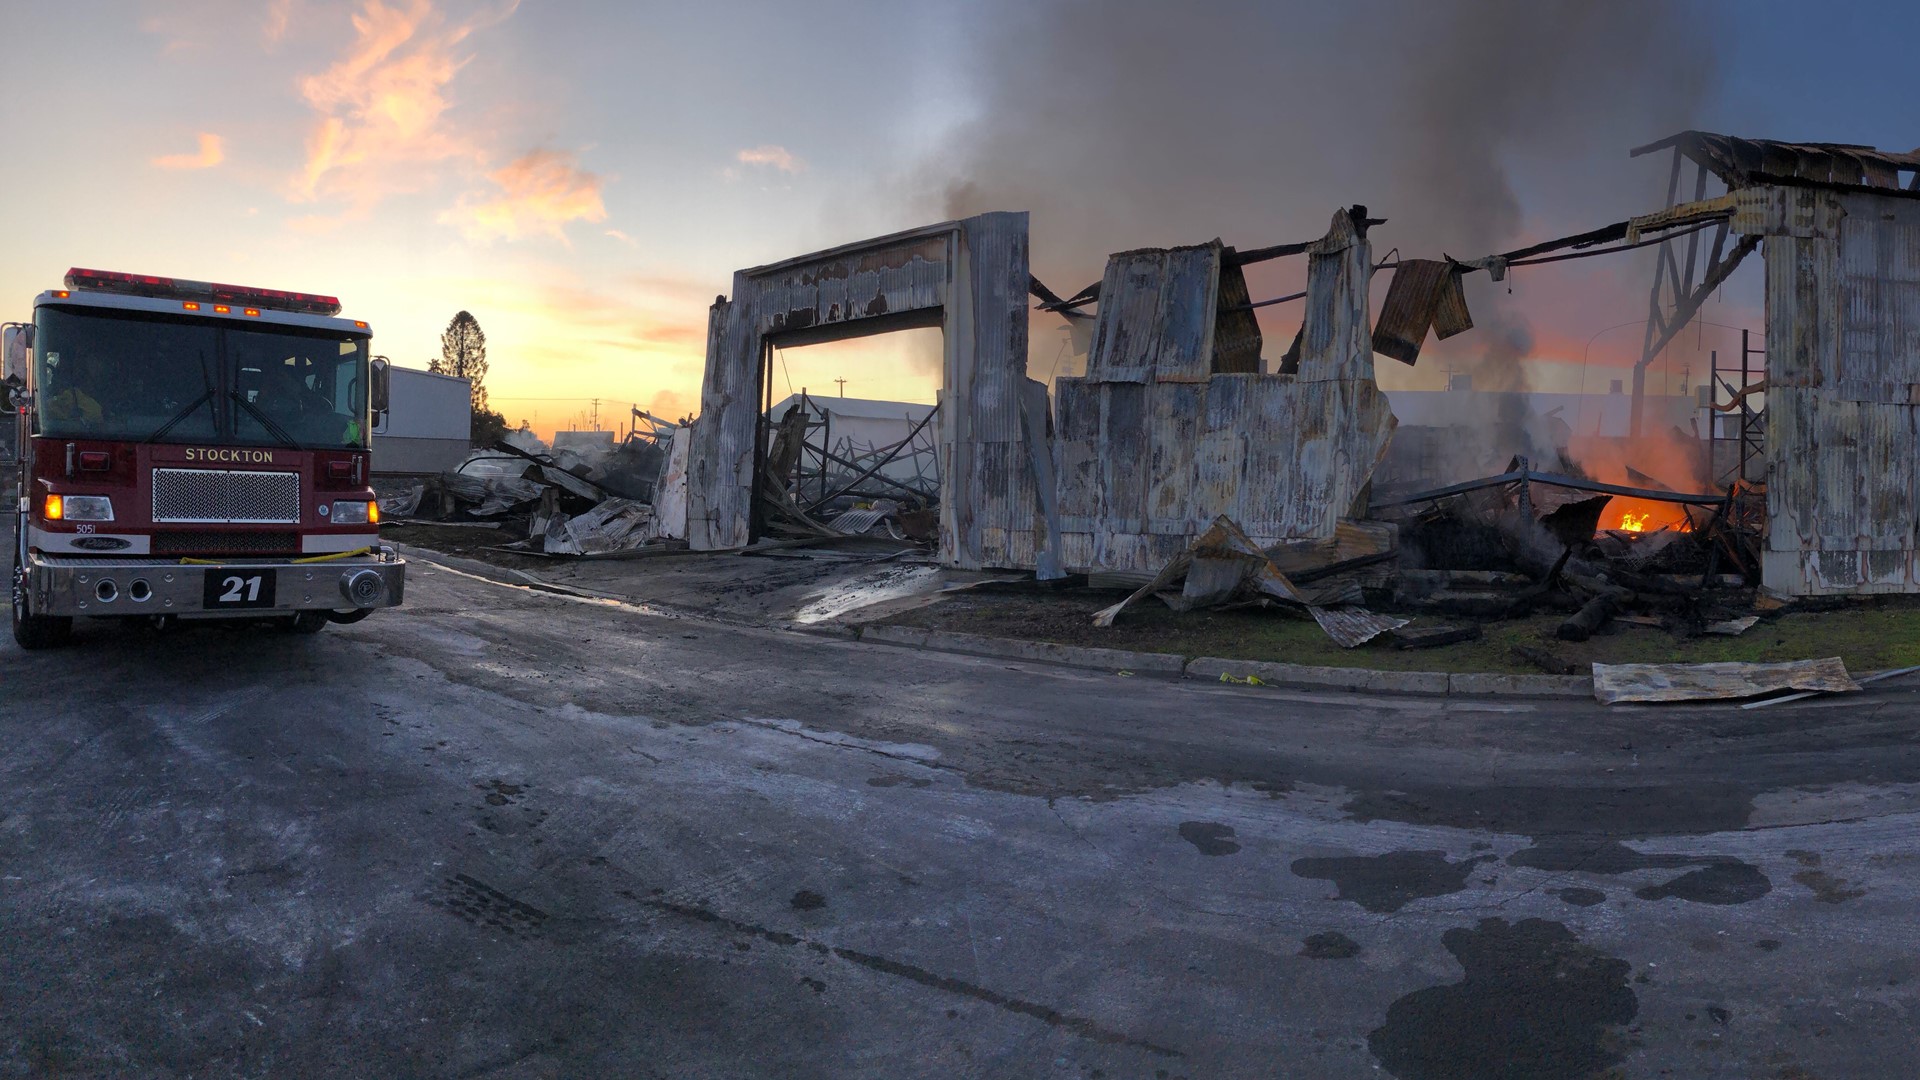 Fires were still smoldering Friday morning from a blaze that destroyed three warehouses in Stockton.